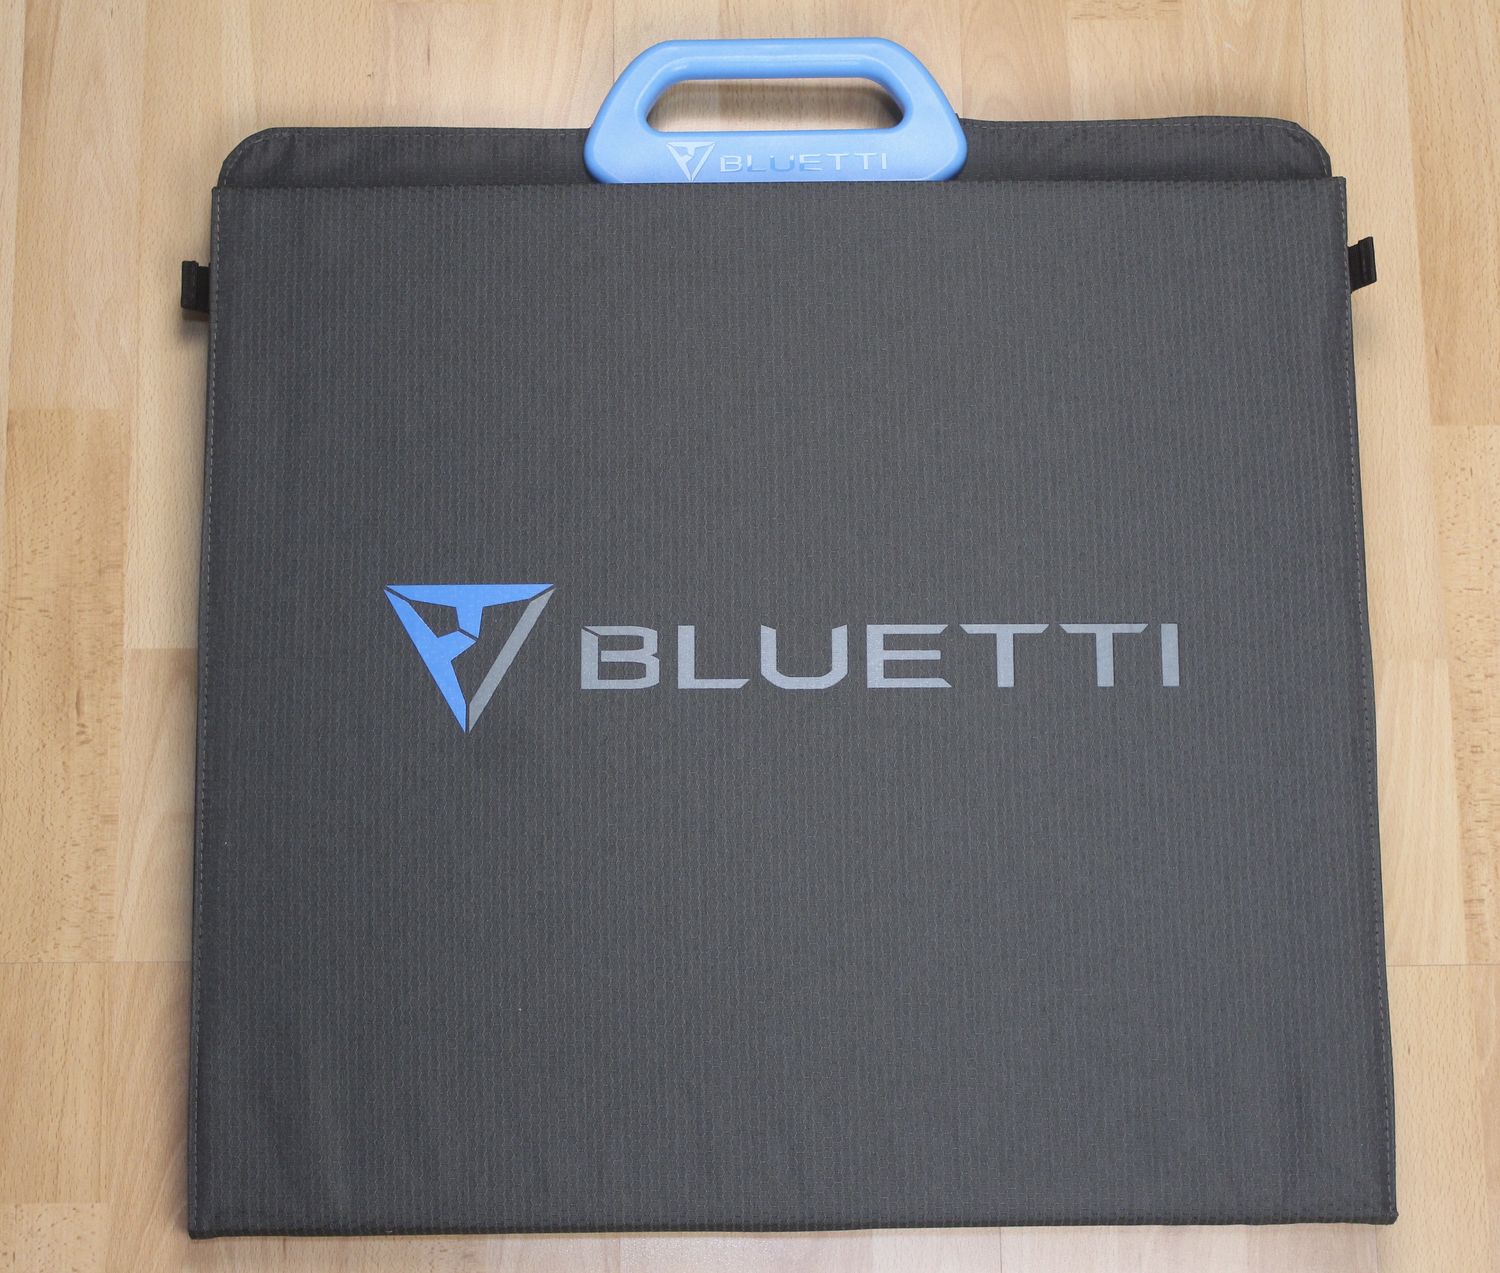 BLUETTI PV200 Solar Panel Review1 | Off-Grid 3D Printing with BLUETTI EB70S and PV200